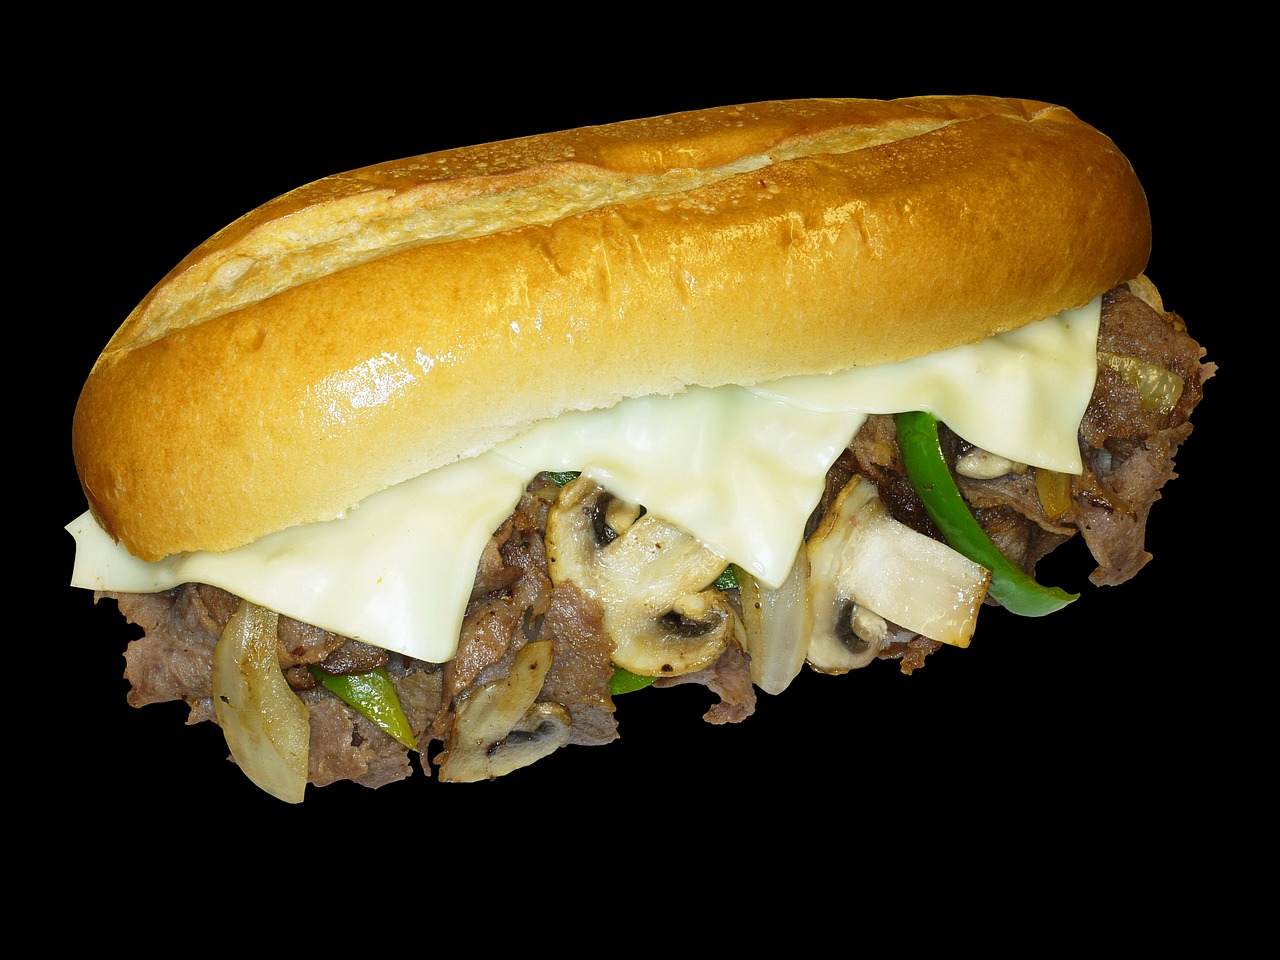 Texas-Sized Beef Sandwiches